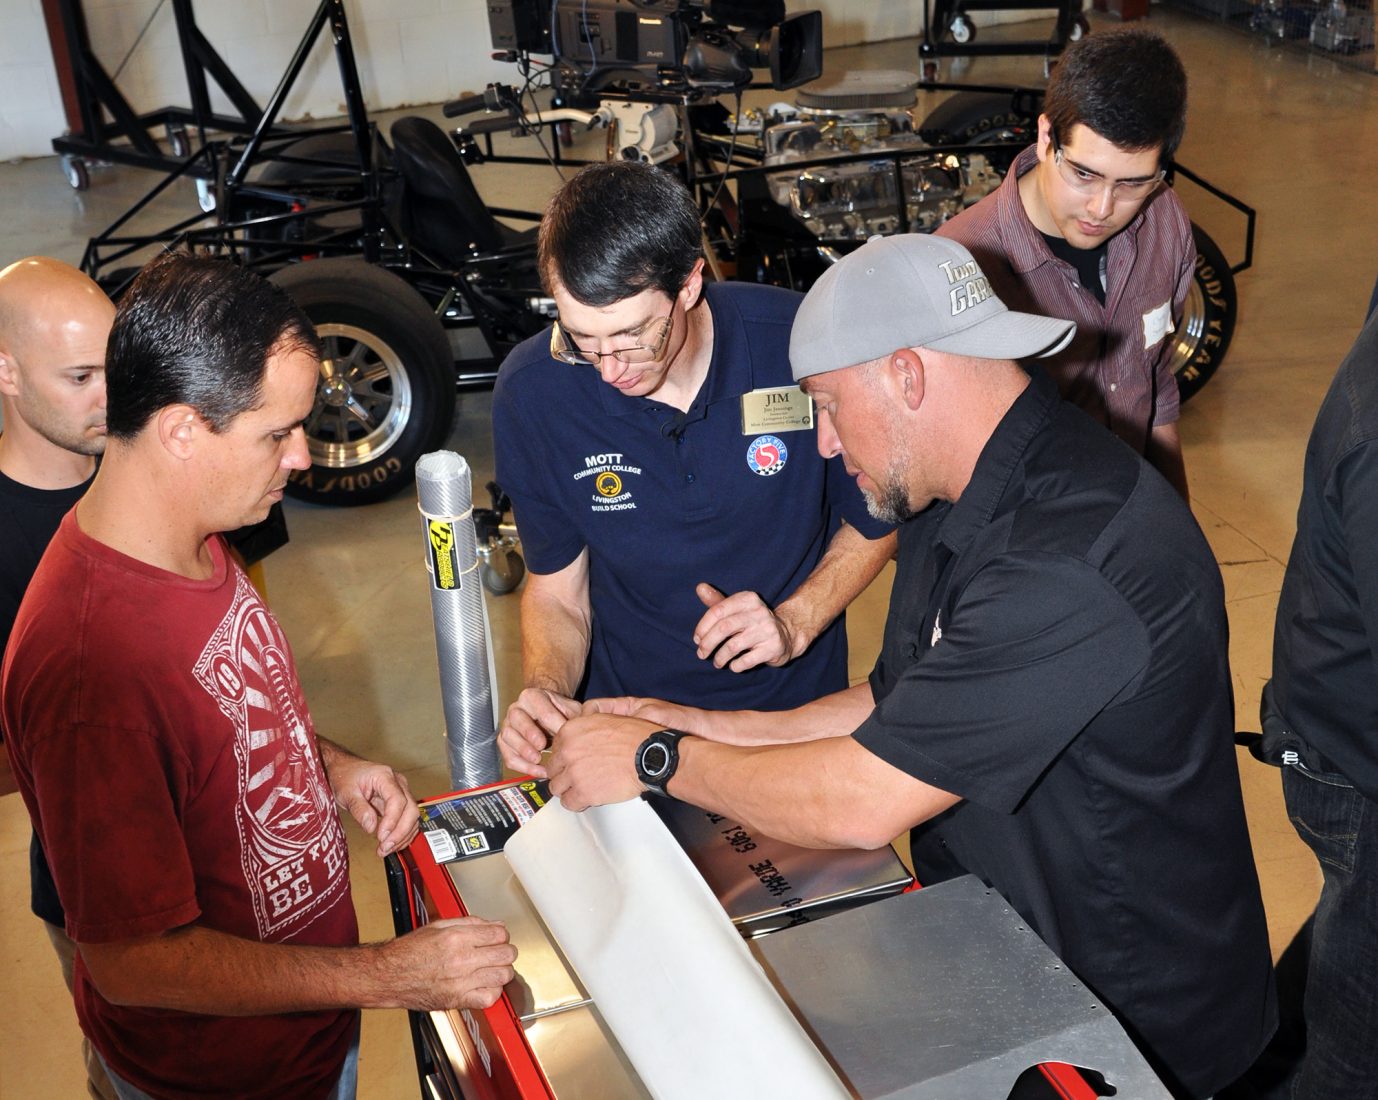 Under the careful direction of Mott College’s Automotive Technology instructors, the students build each car as a team.  Each student has a chance to build as much or as little of the car as they desire.